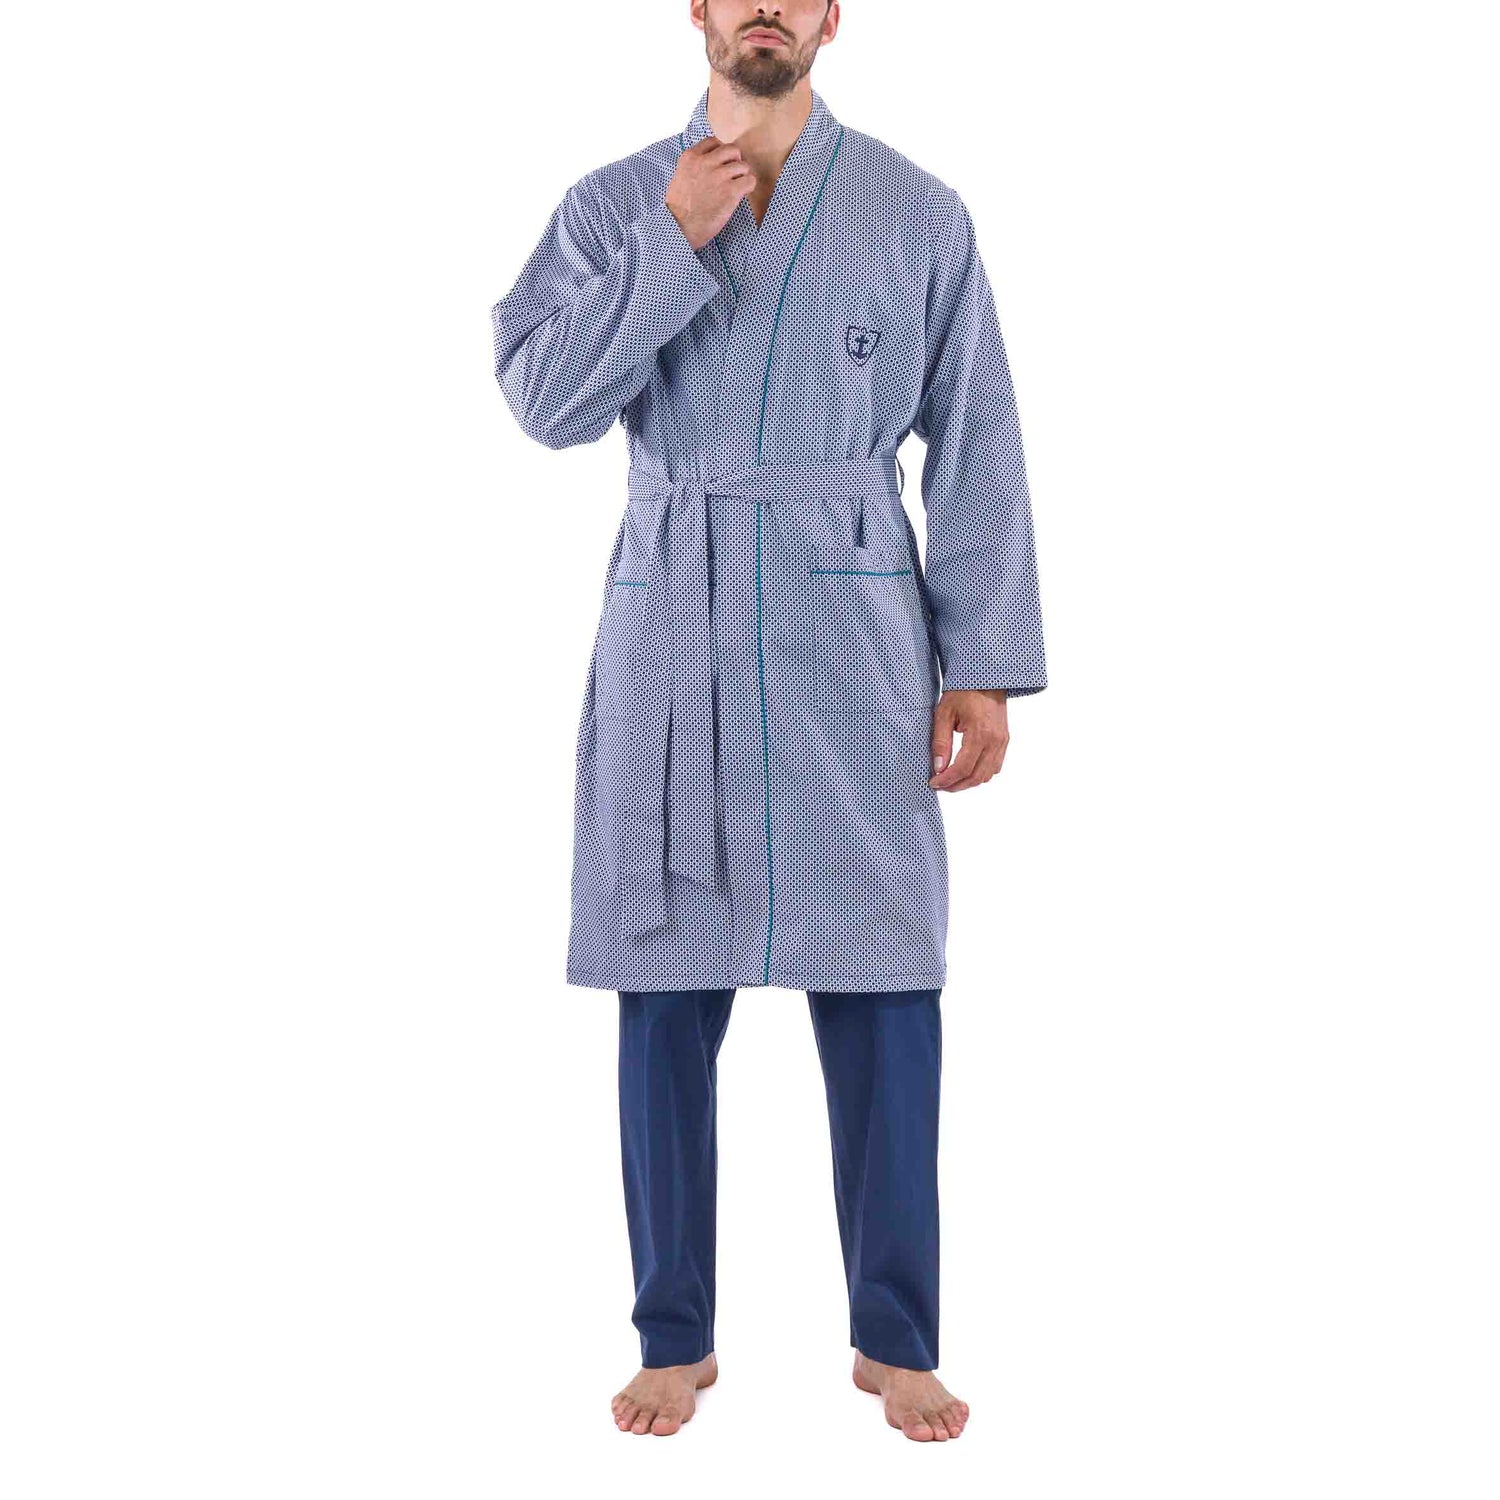 Bathrobe in Printed Poplin Lined with Sponge NAVY BLUE Small Patterns